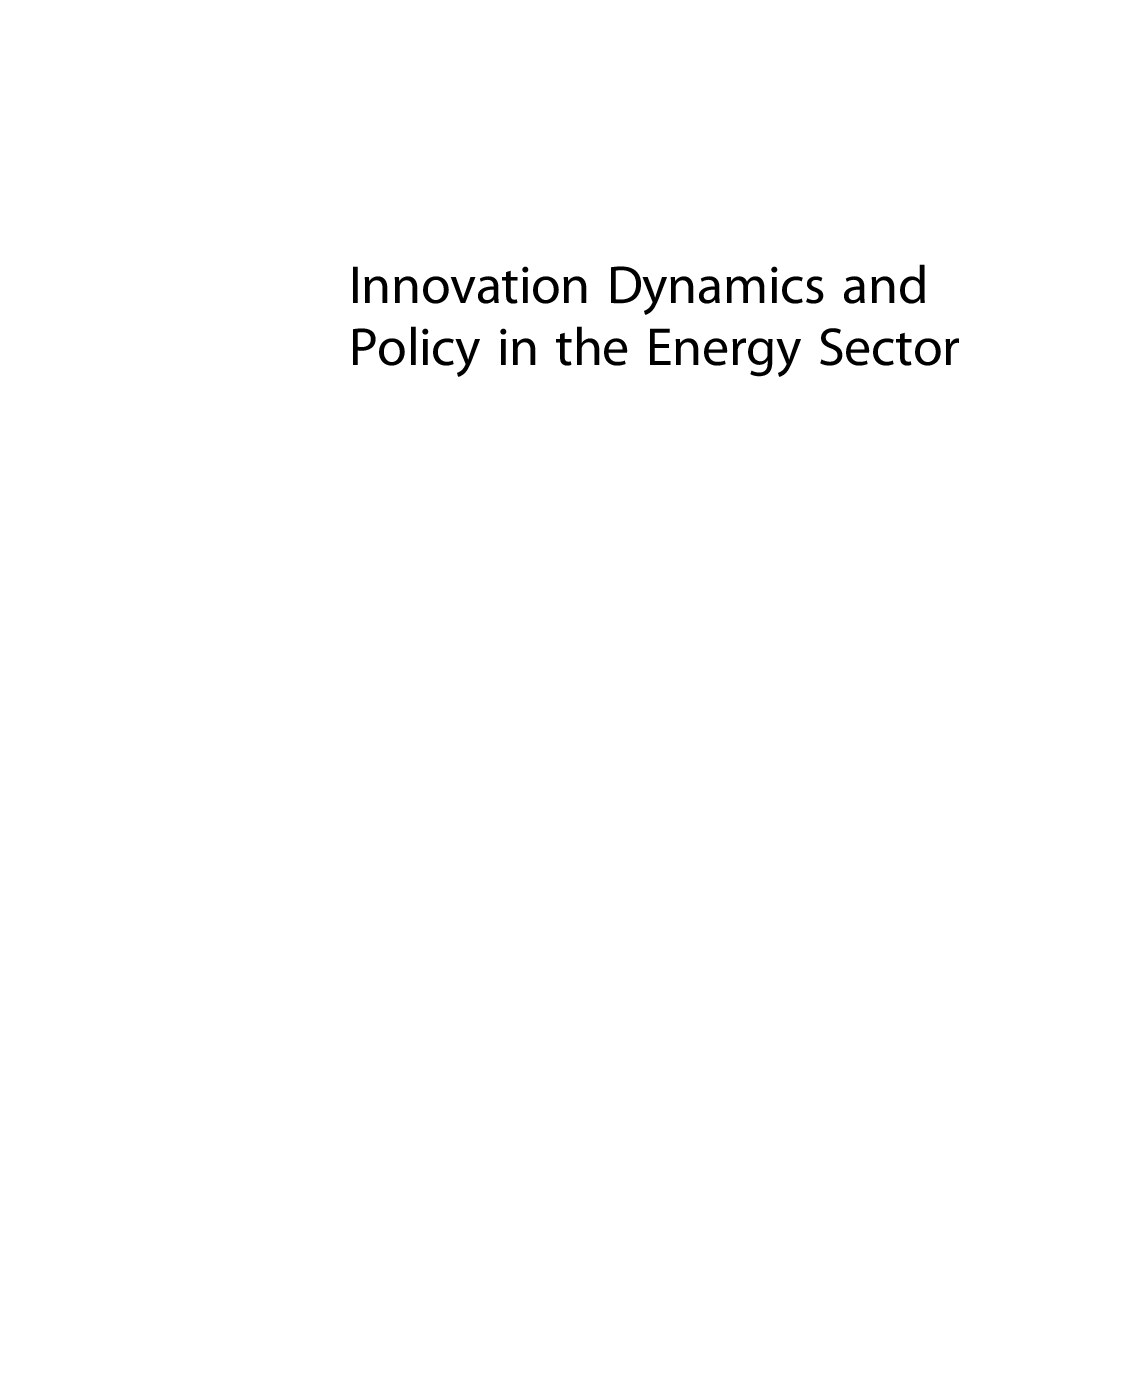 Building Global Energy Markets, Institutions, Public Policy, Technology and Culture on the Texan Innovation Example-Acade, 2021